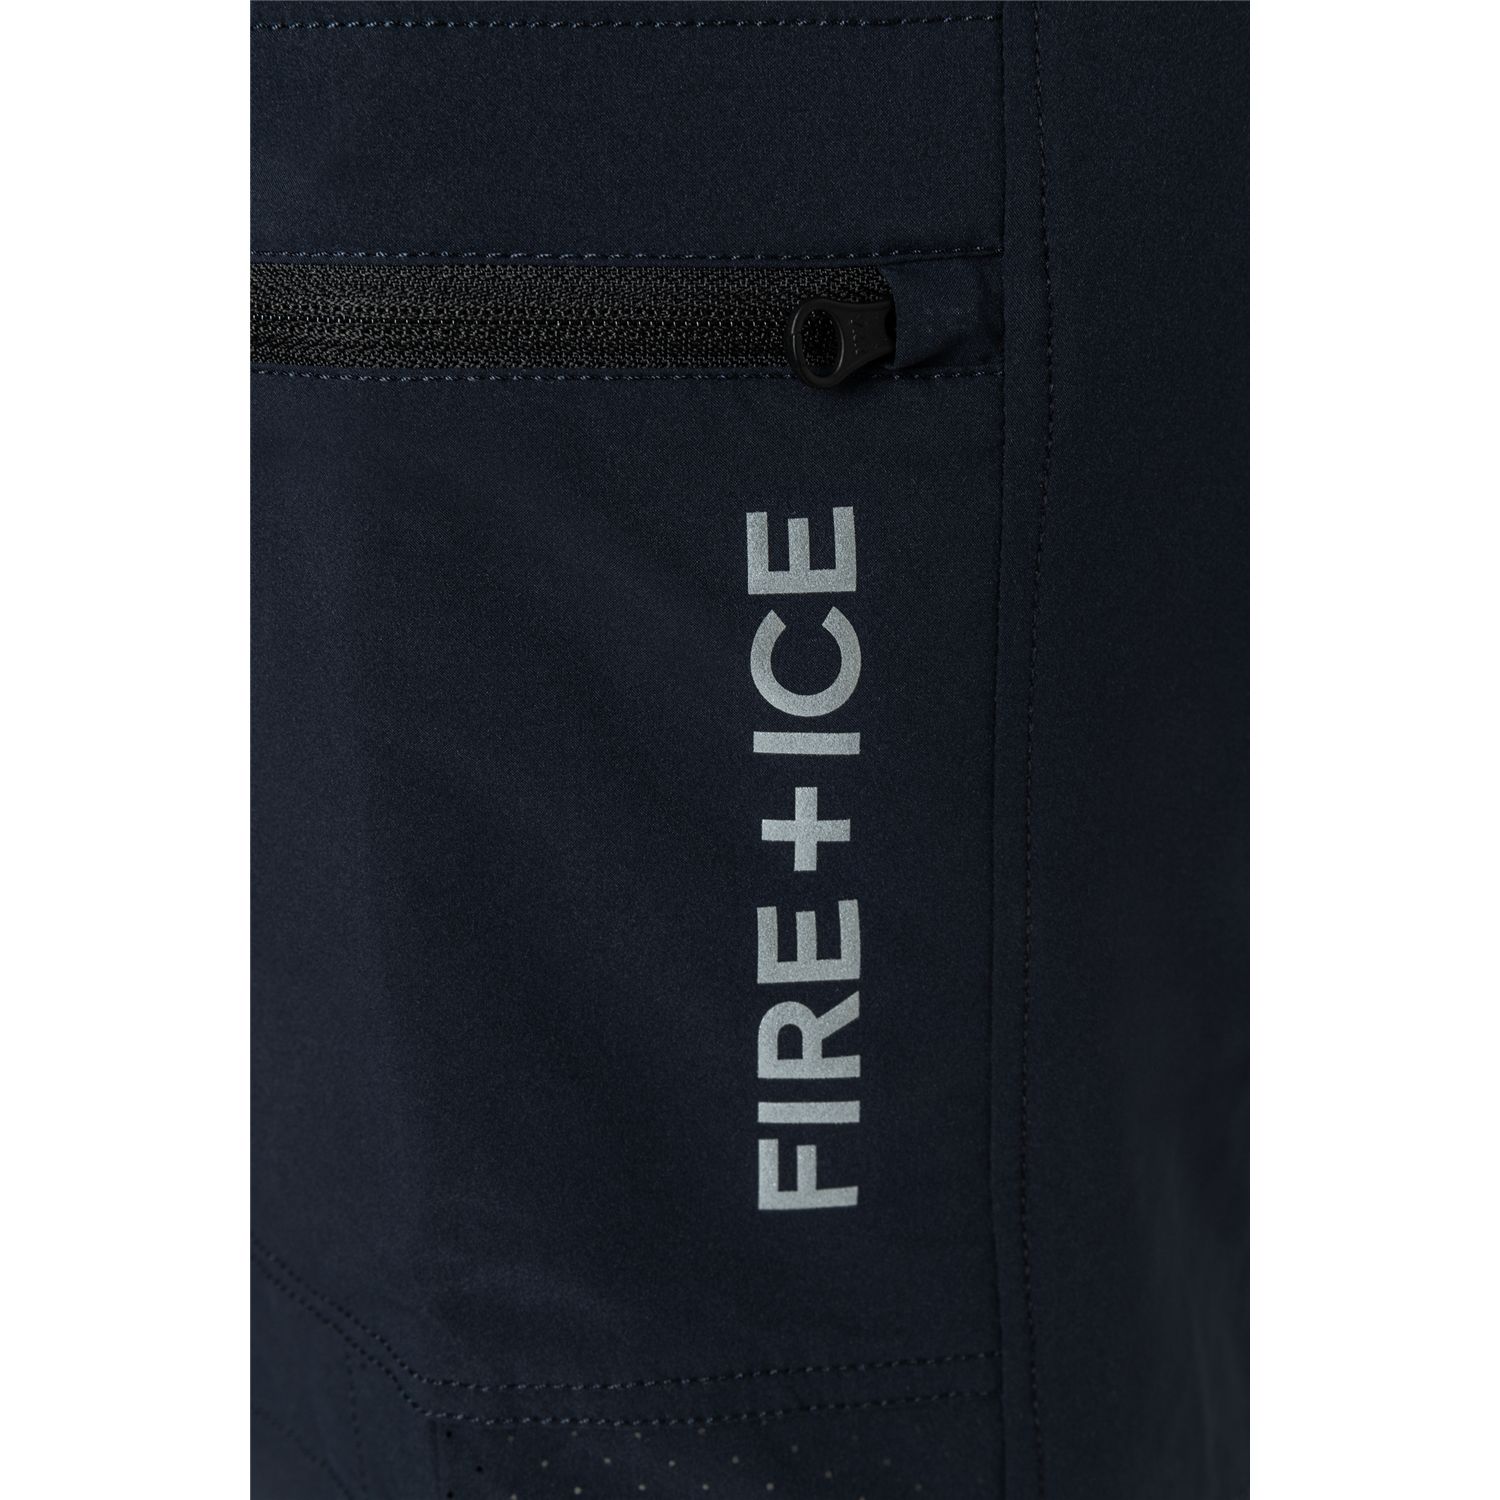 Pantaloni Scurți -  bogner fire and ice Pavel Functional Shorts